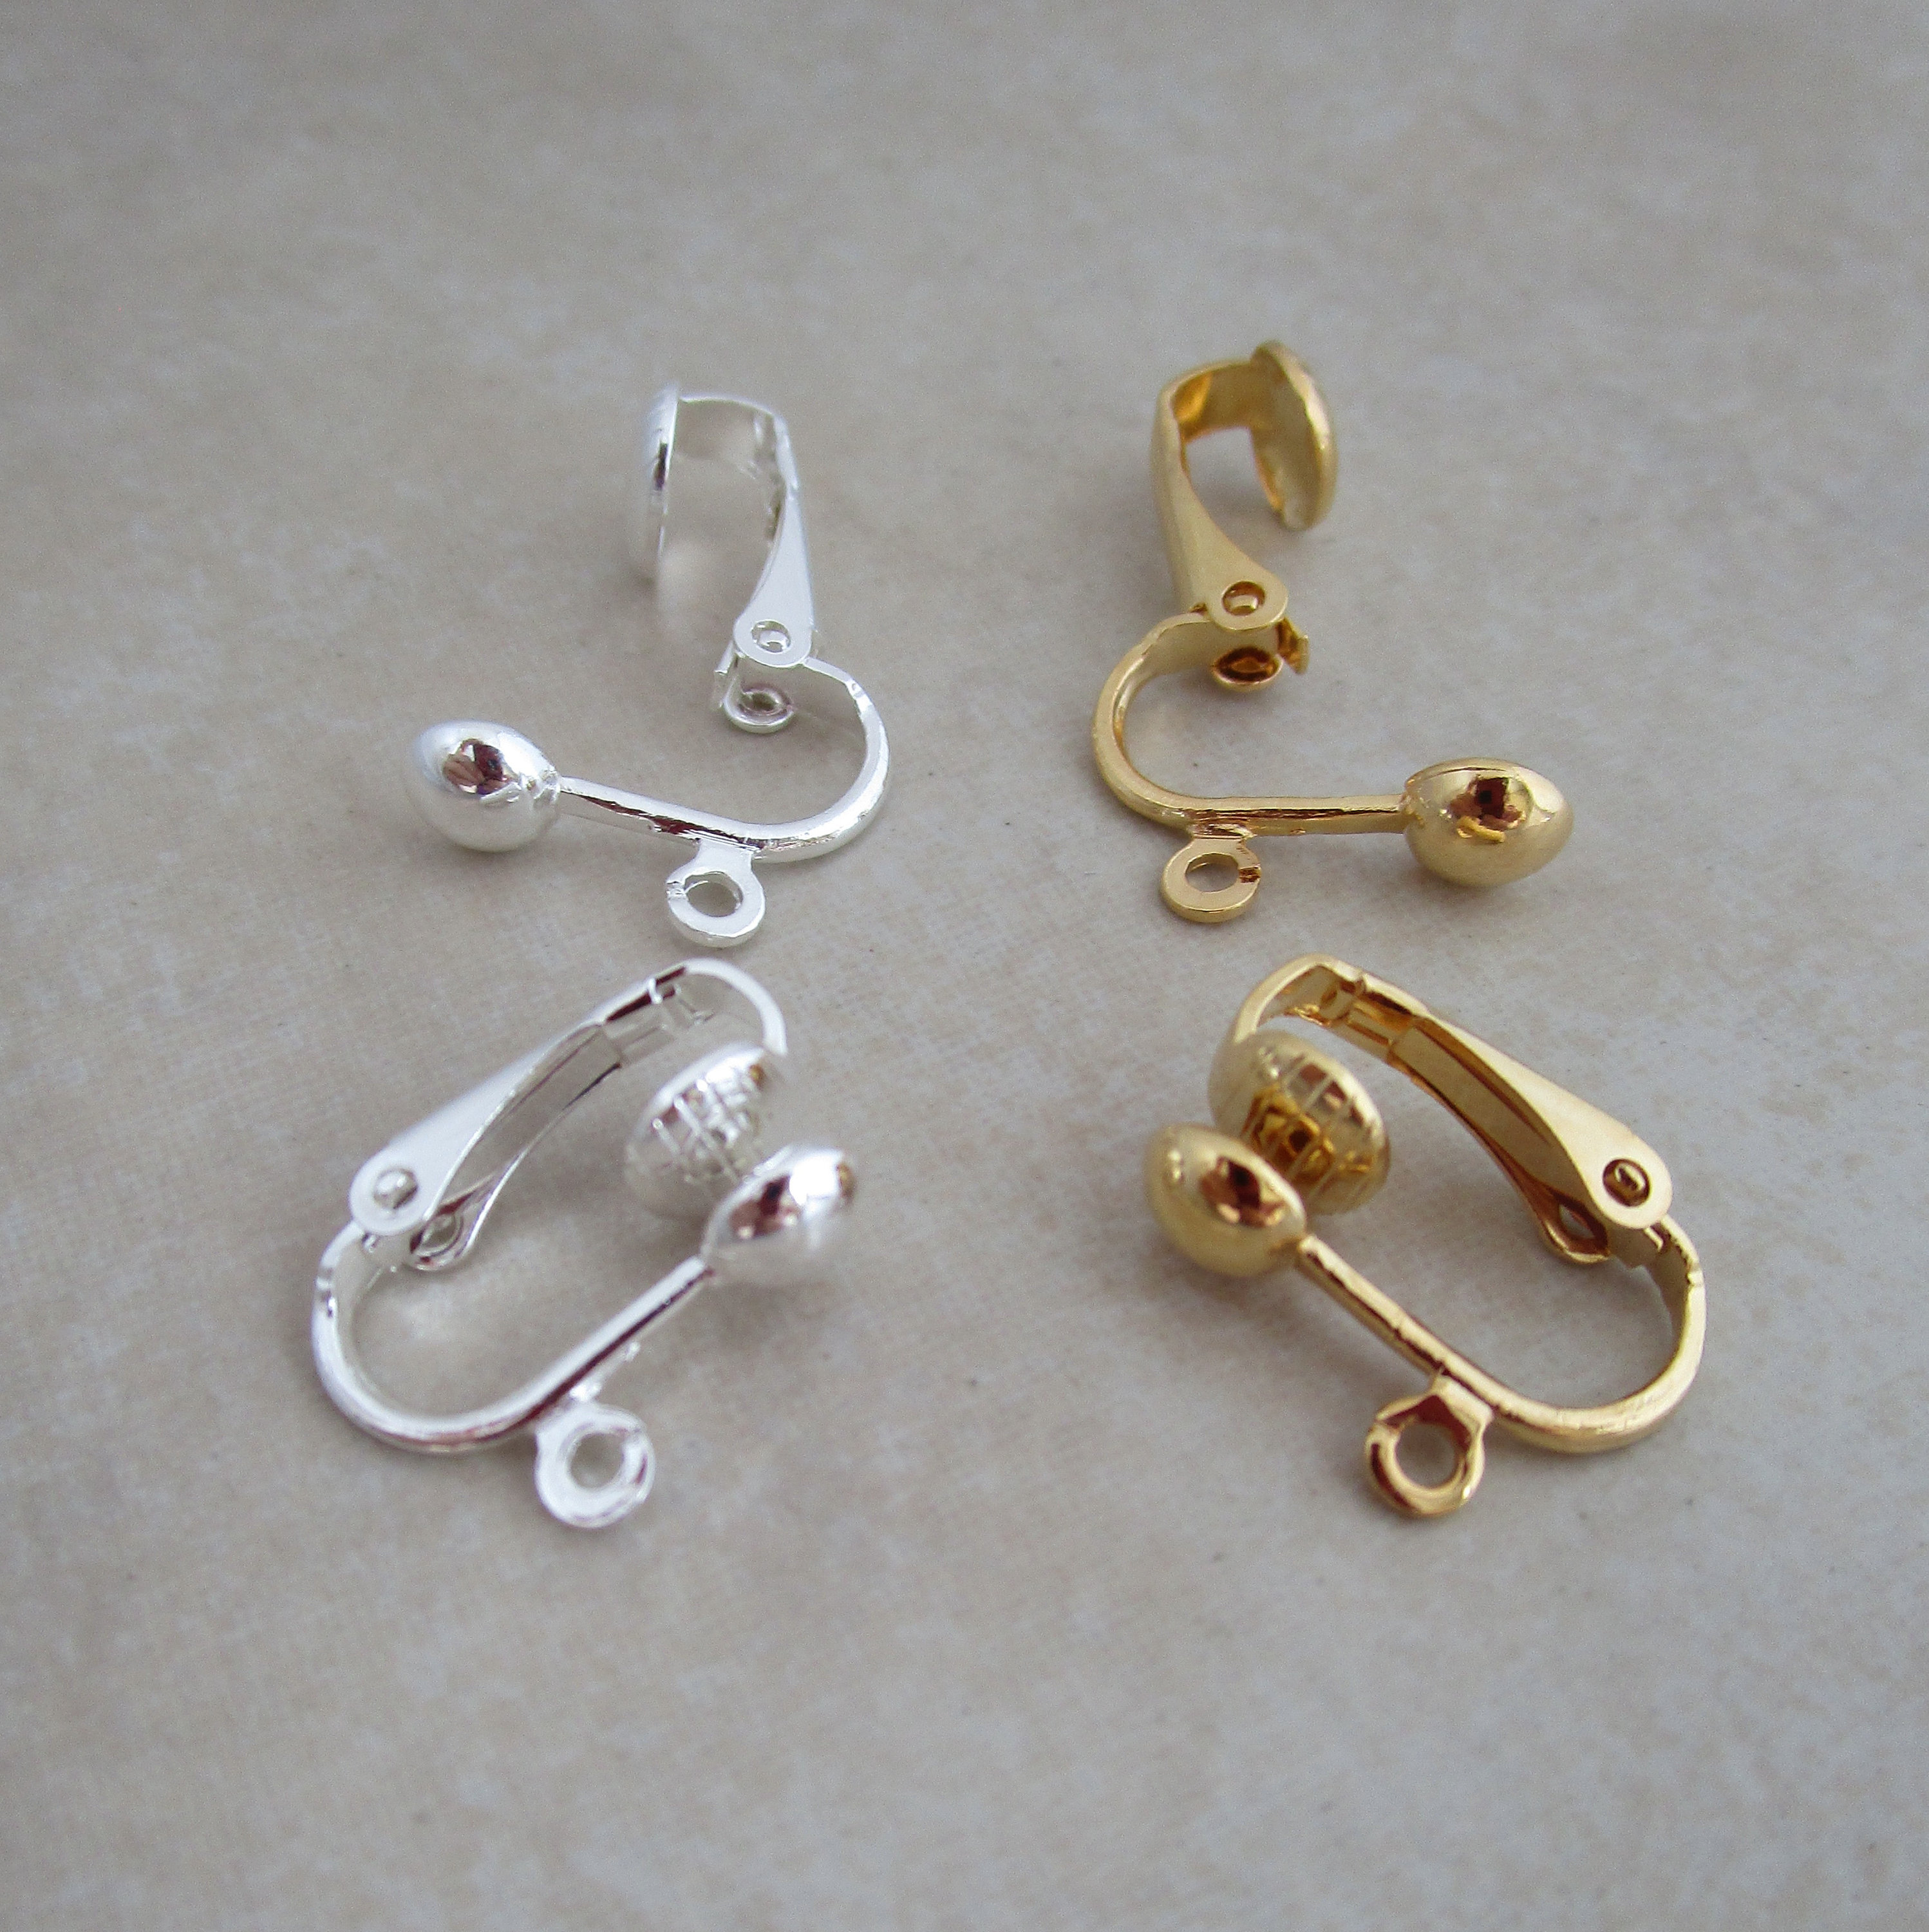 Adhesive Converters for Clip Earrings in Silvertone - Earring Doctor